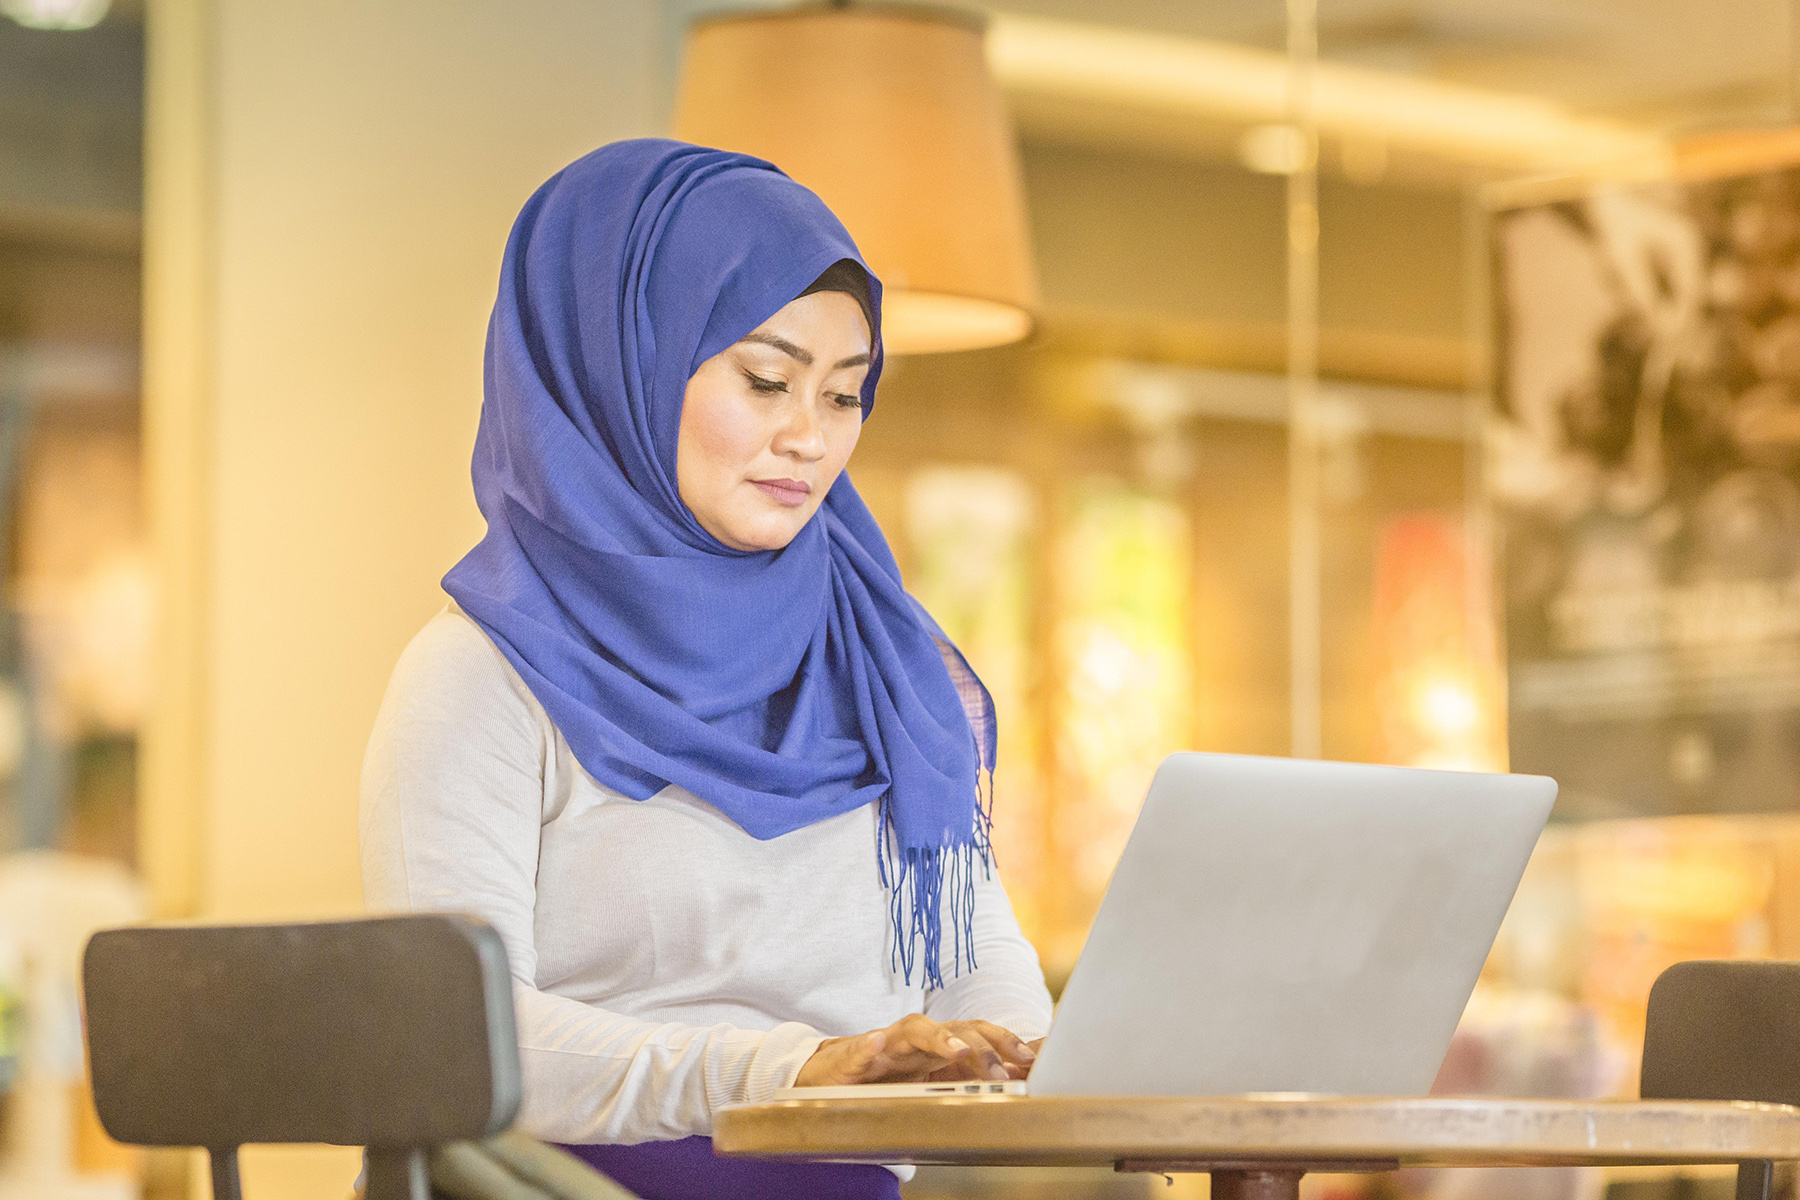 A woman wearing a purple head scarf uses her laptop to find a doctor in Singapore

